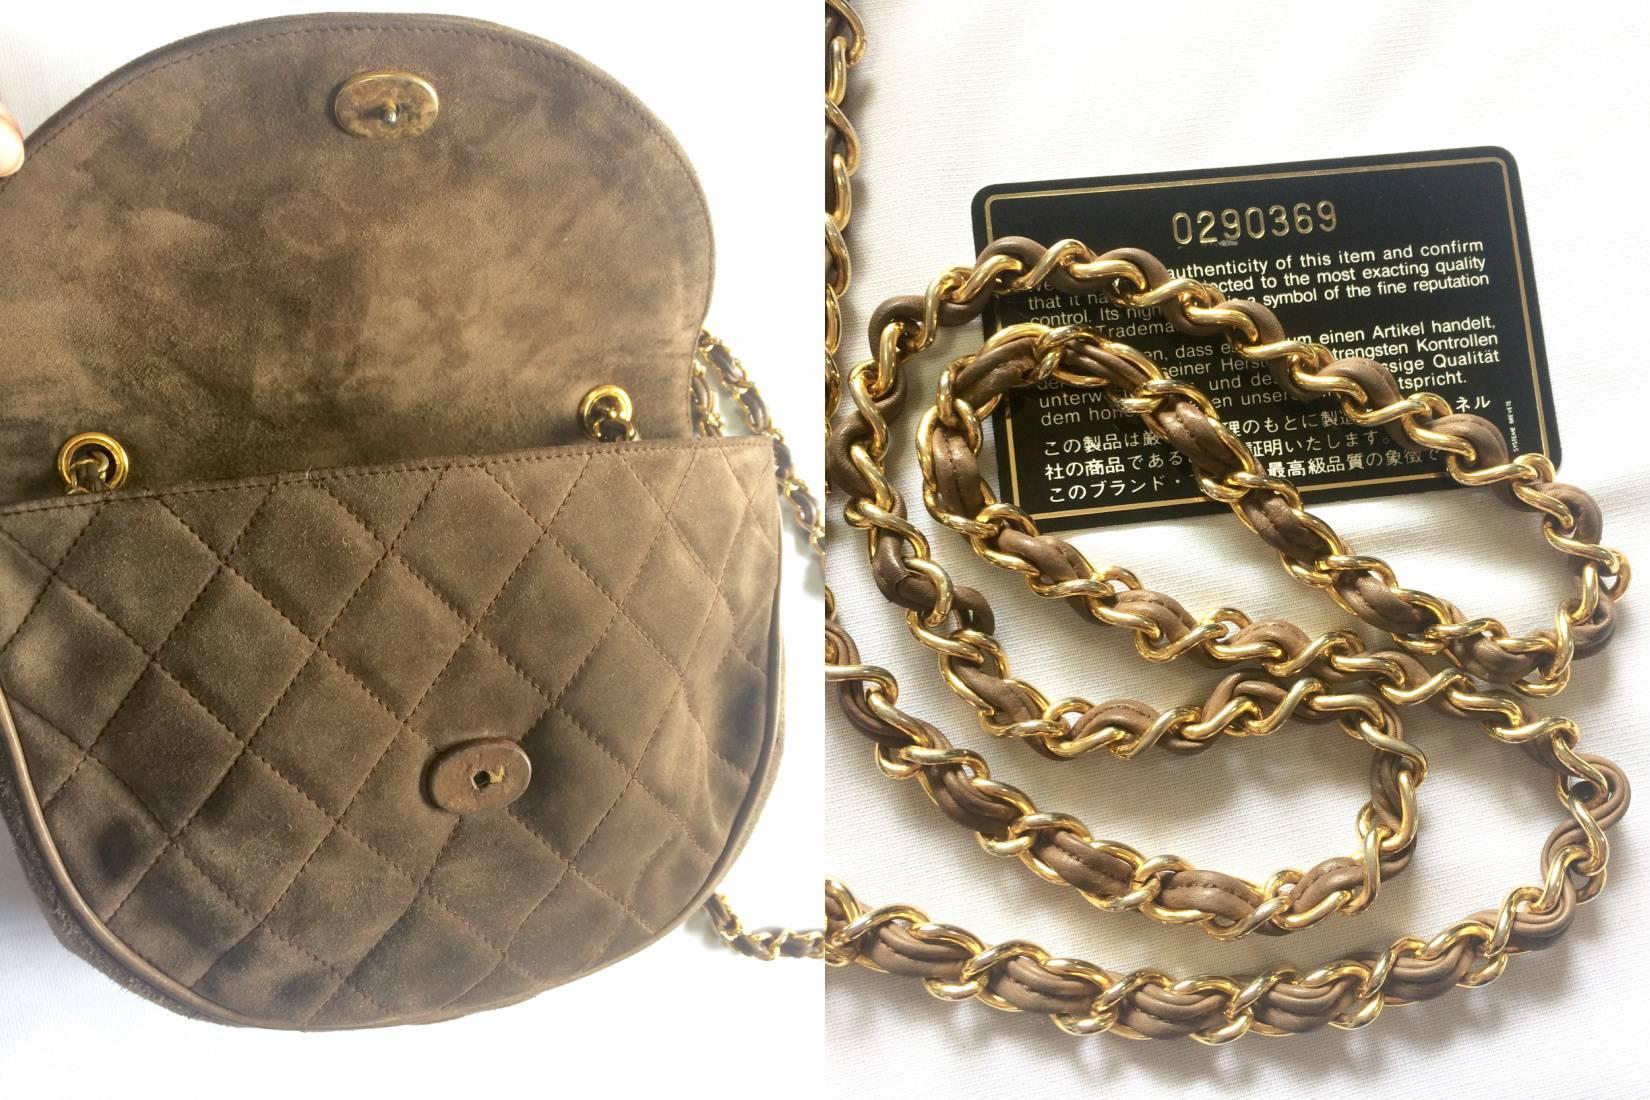 Women's Vintage CHANEL brown suede chain shoulder bag with gripoix stones and cc mark. For Sale